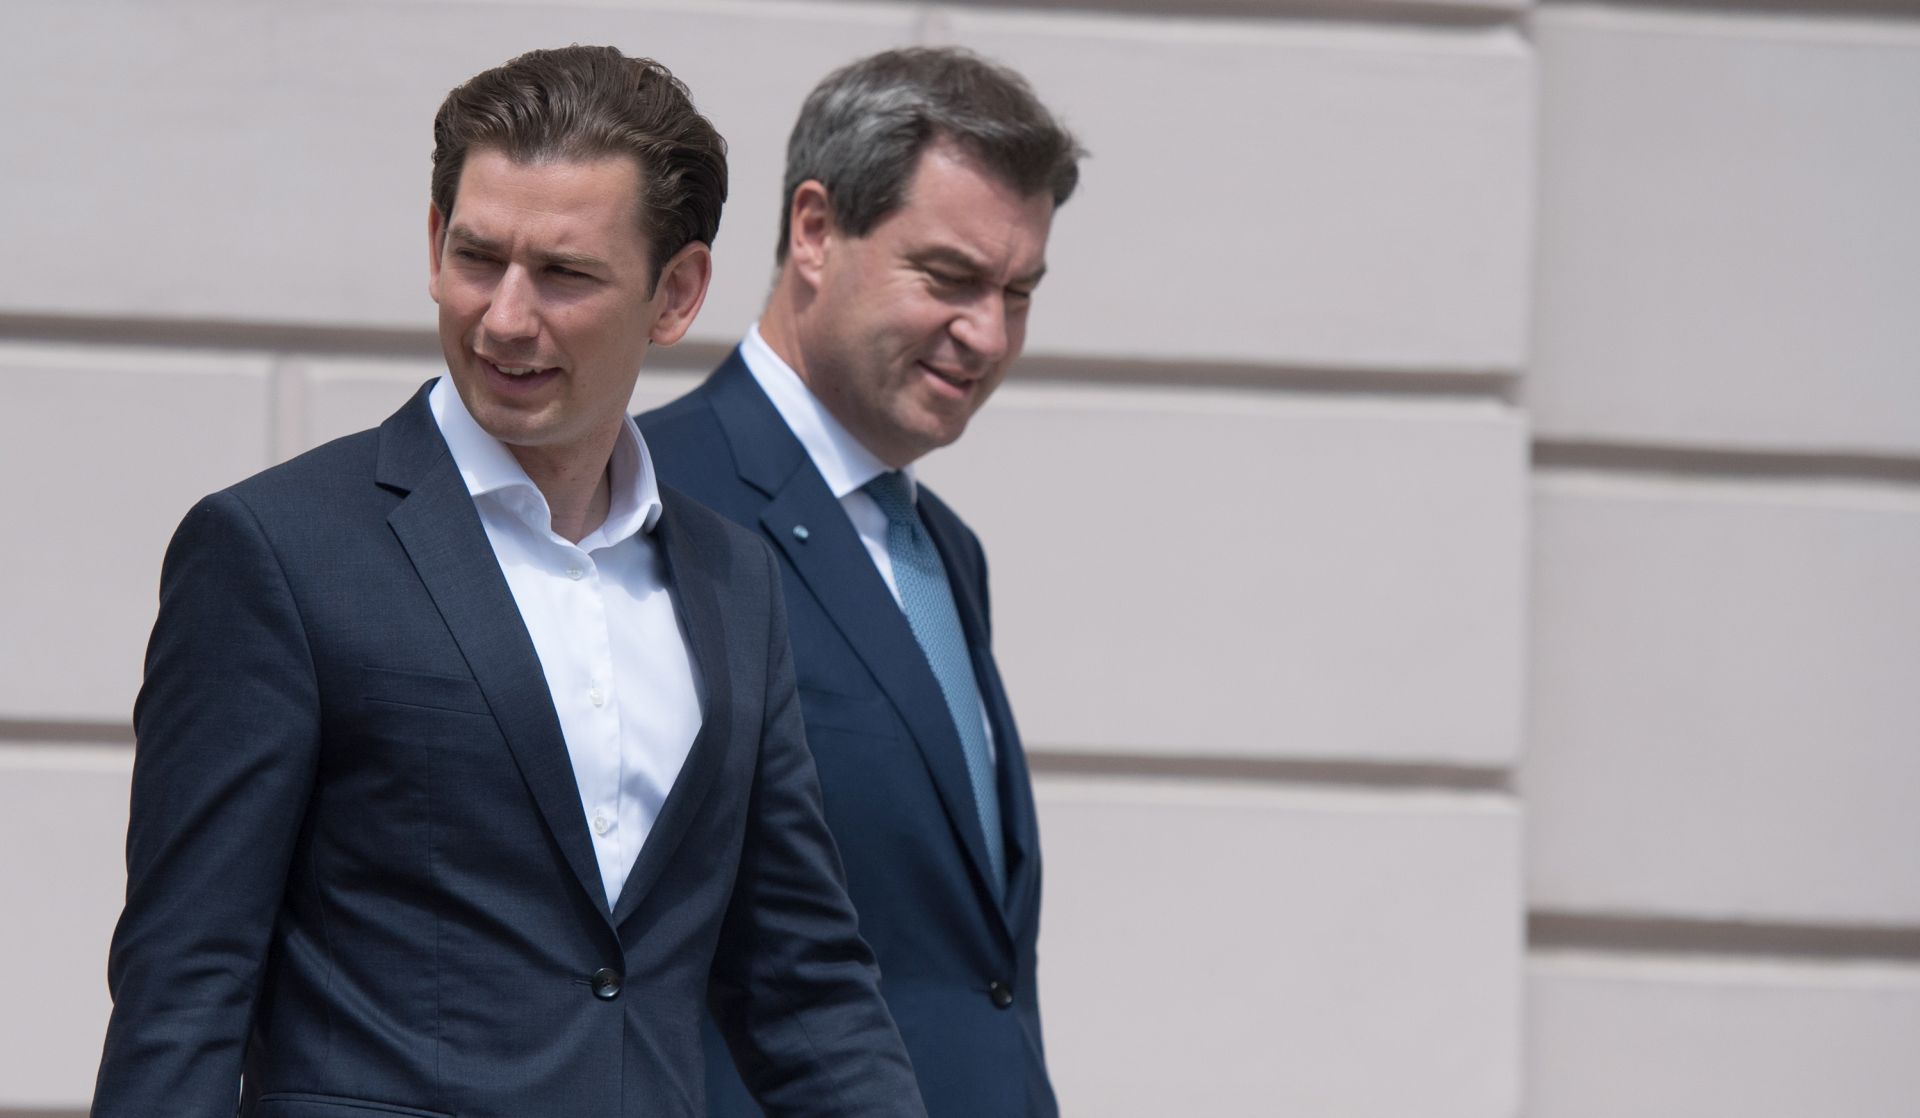 epa06823538 German state Bavaria's Prime Minister Markus Soeder (L) and Austrian Federal Chancellor Sebastian Kurz (R) on their way to the family photo during the meeting at the Landhaus in Linz, Austria 20 June 2018. The Bavarian Government is in Linz for one day holding a conference together with the Austrian Government with asylum issues being on the agenda.  EPA/MICHAEL GRUBER